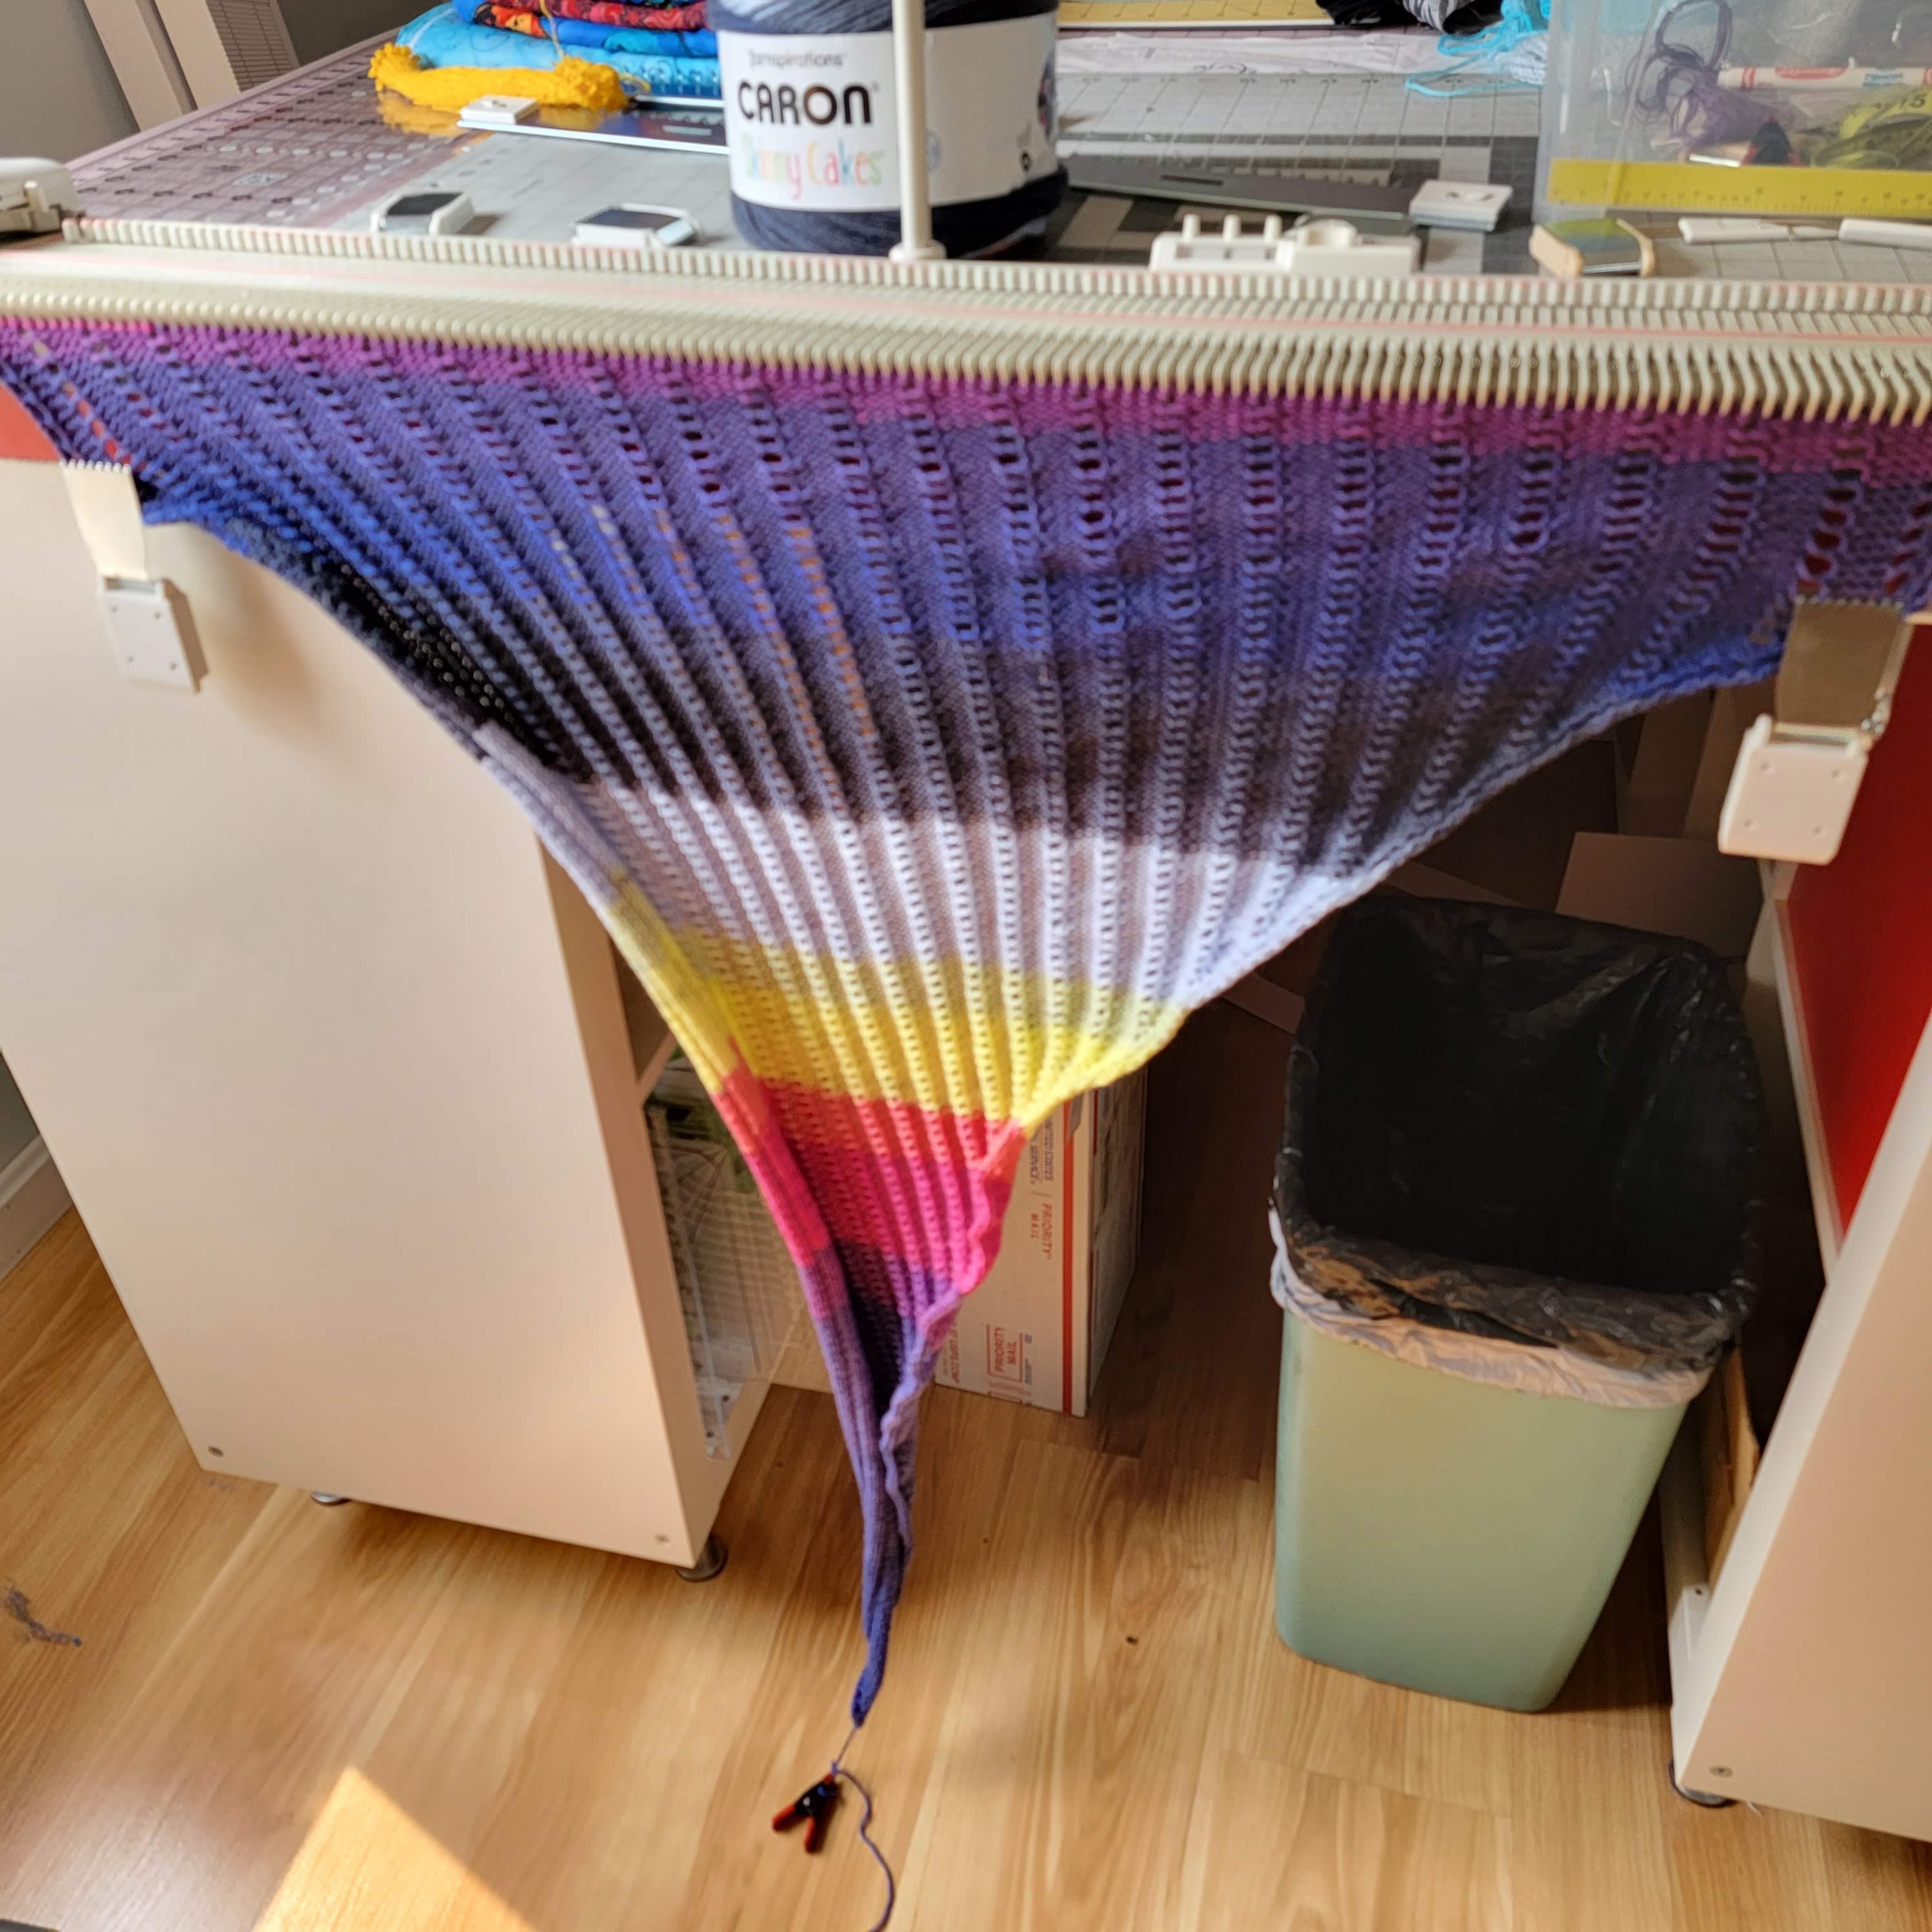 Becca's Crazy Projects: Big Knitting with Caron Cakes